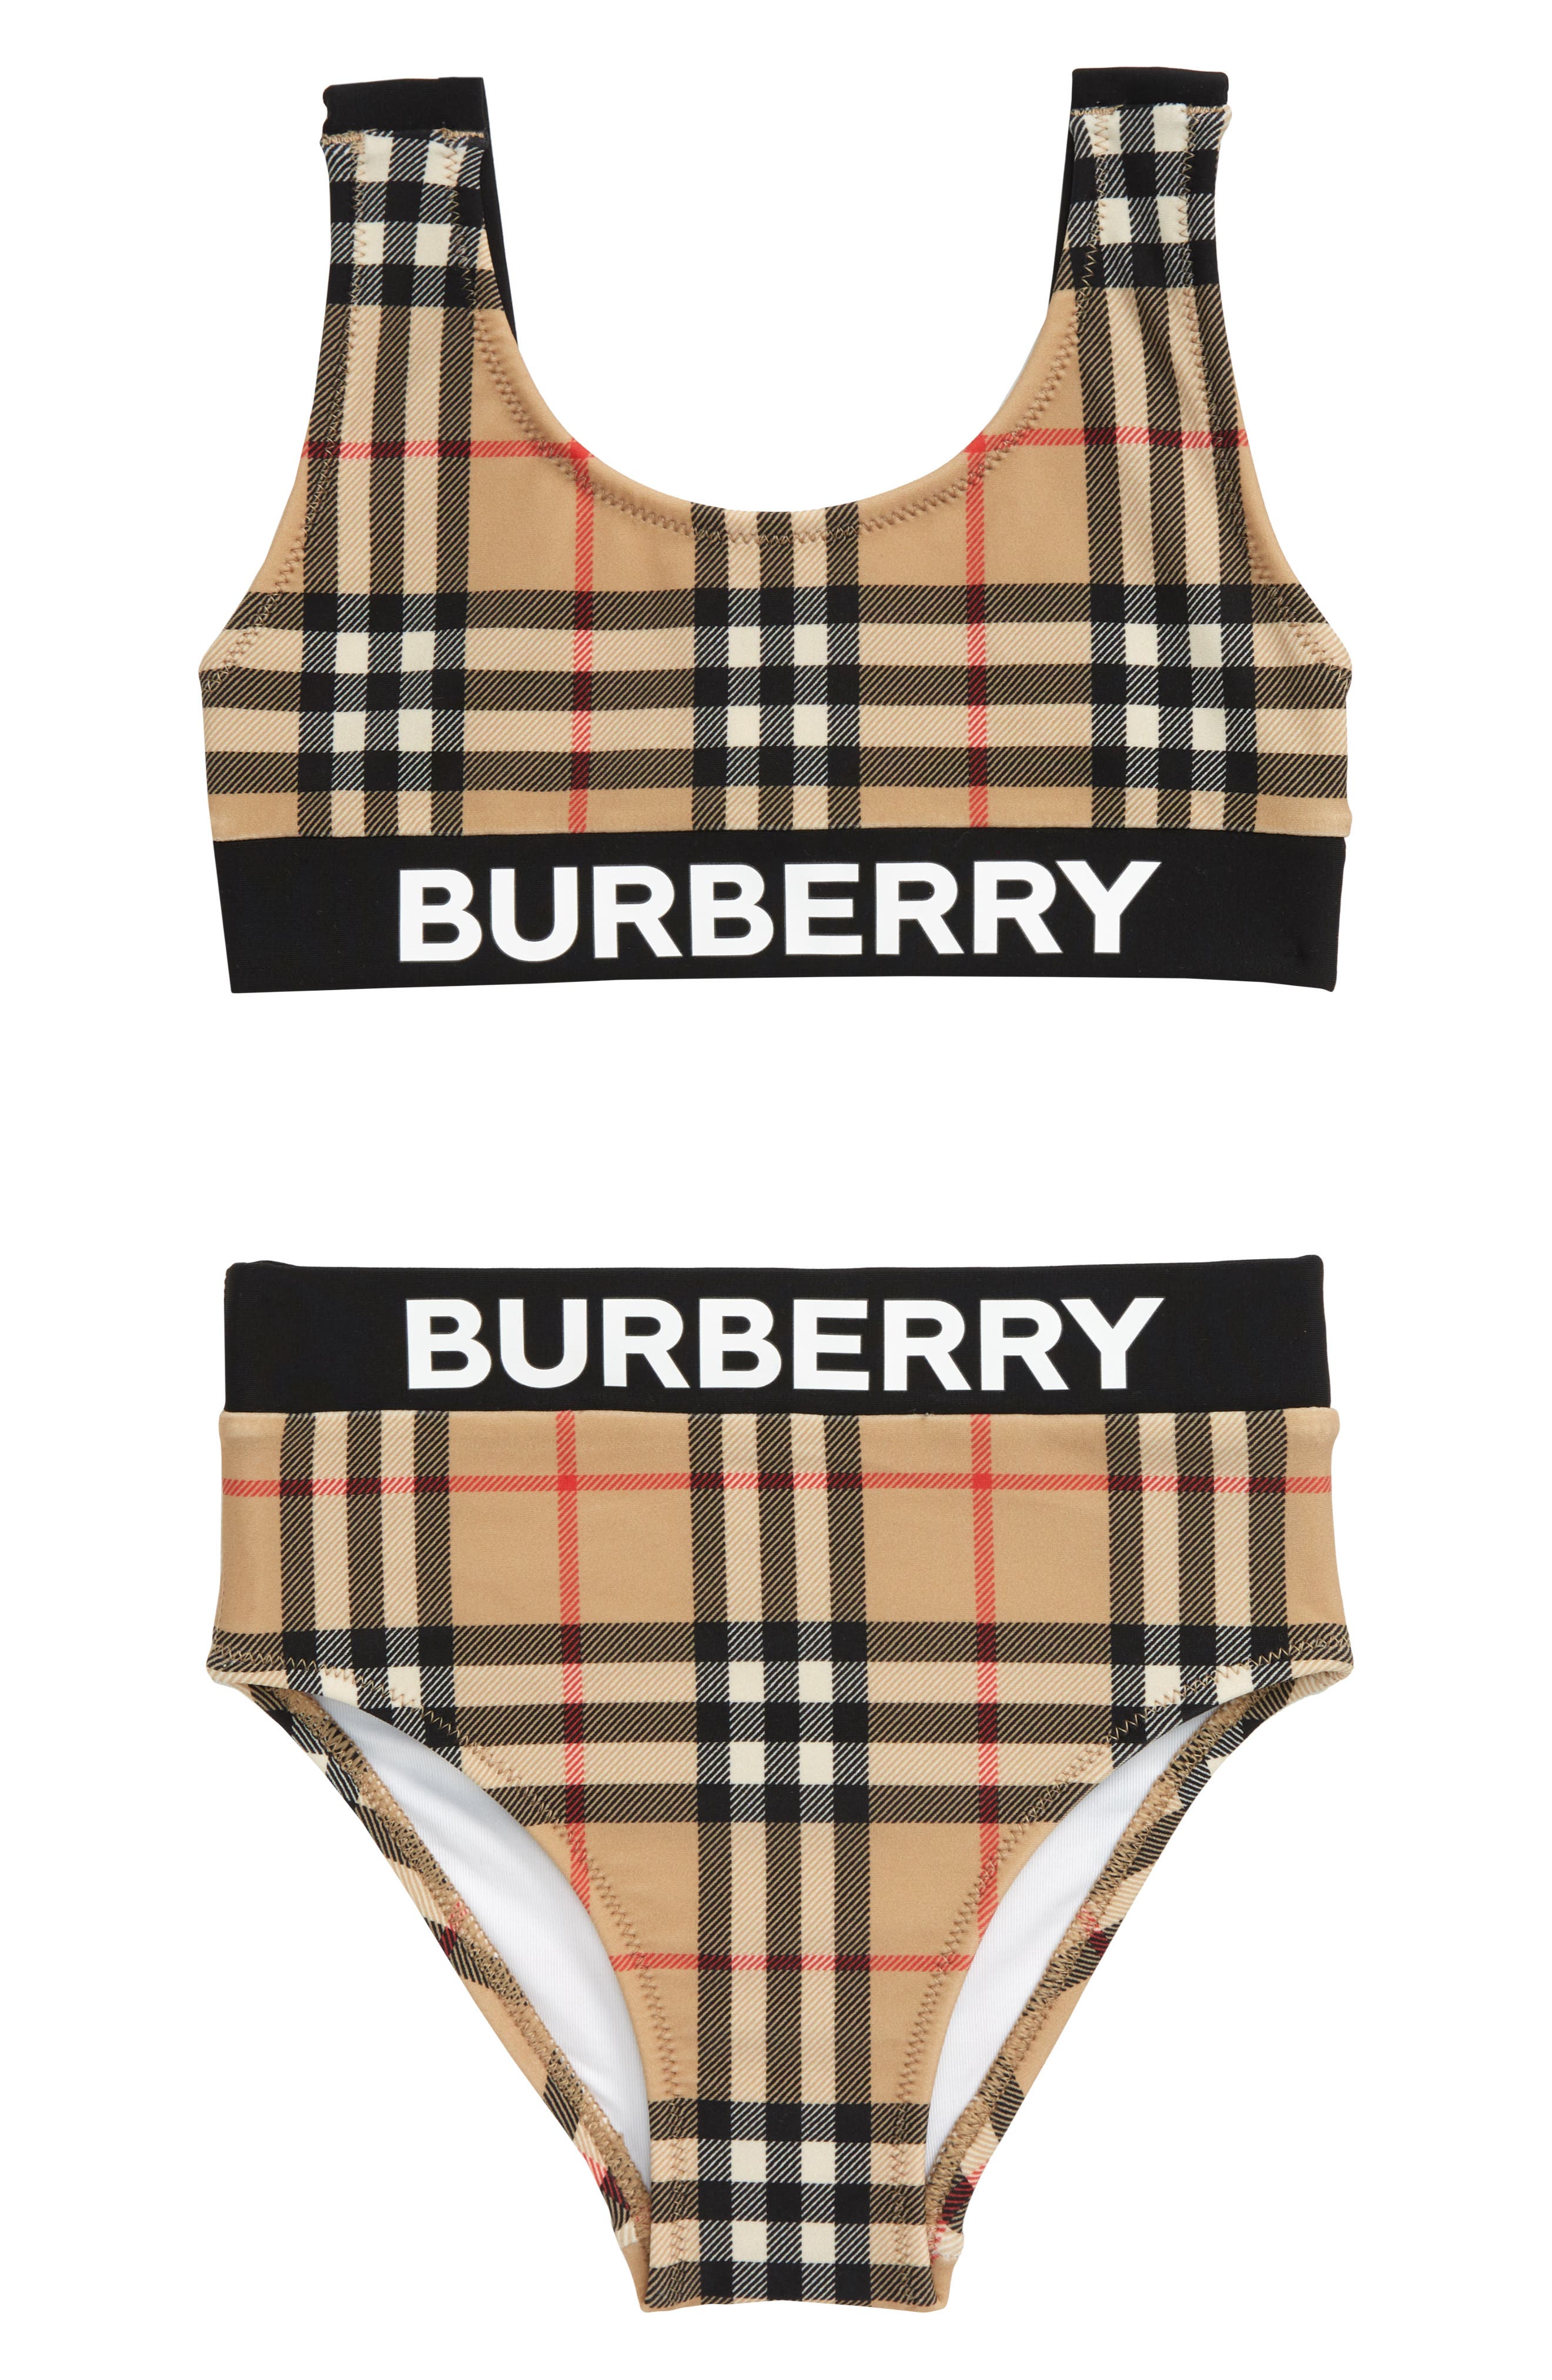 burberry clothes for toddlers